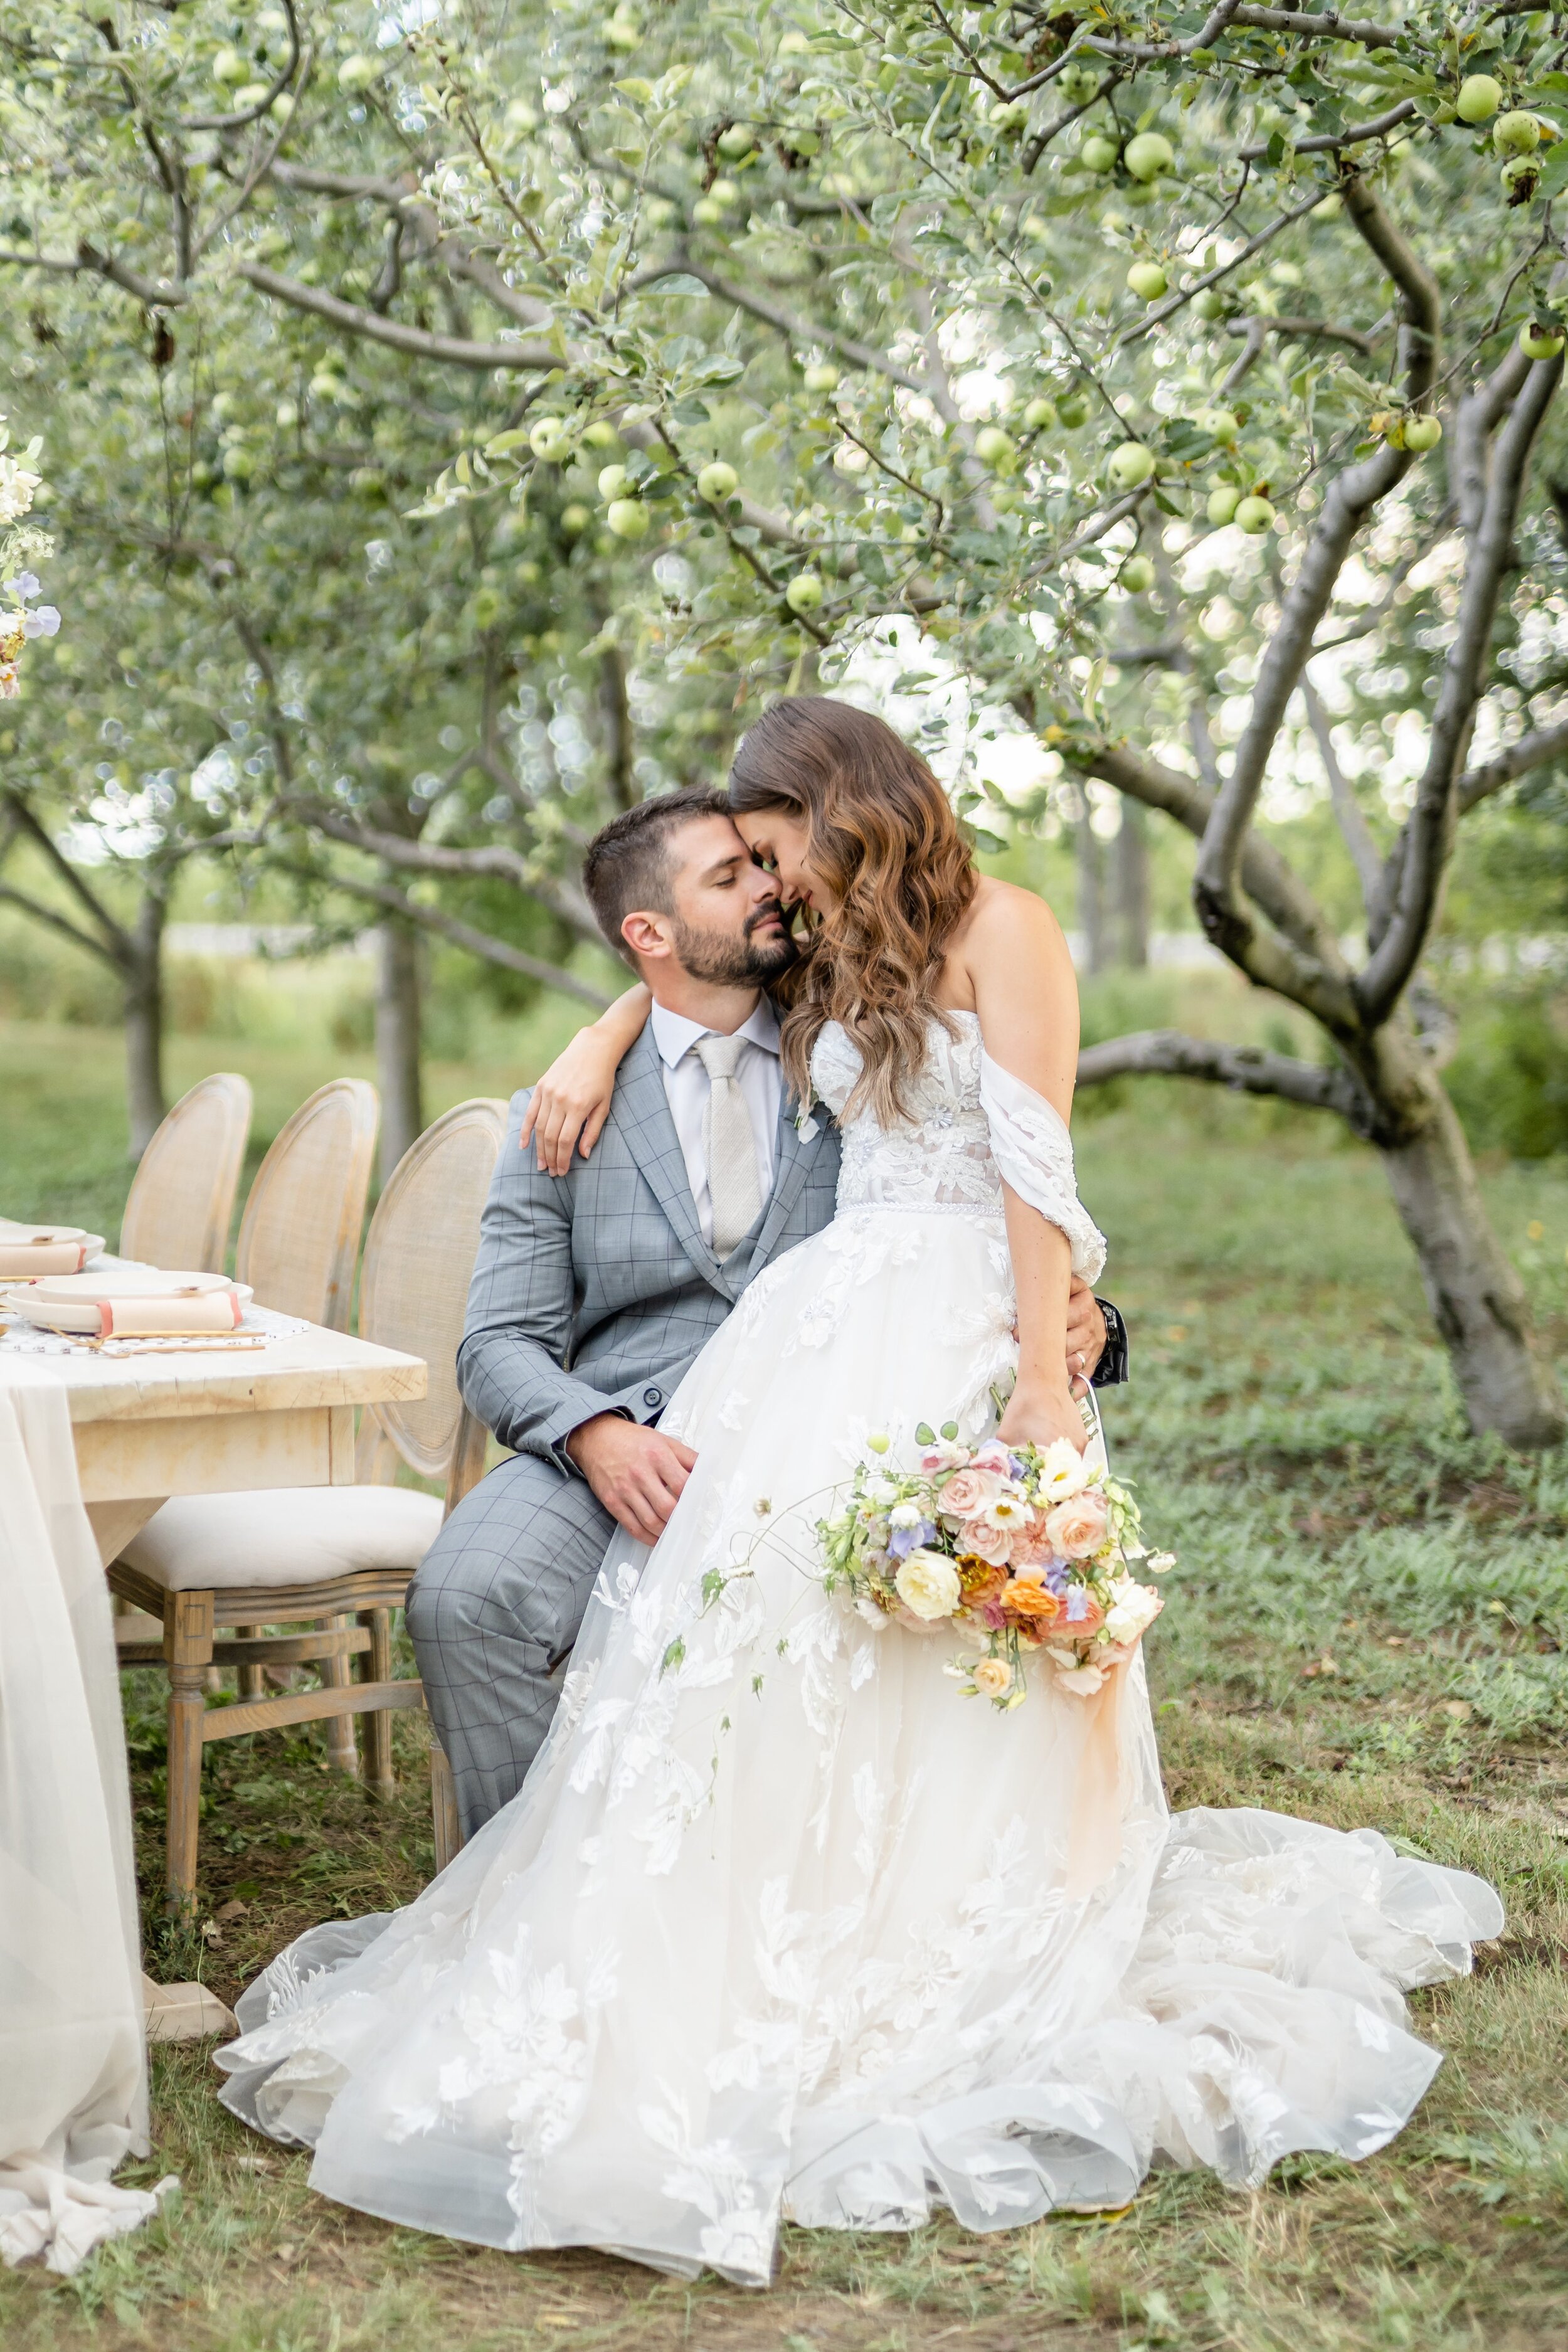 Delicate Luxe Micro-Wedding Inspired by Amalfis Lush, Romantic landscapes | Dylan & Sandra Photography -34.jpg